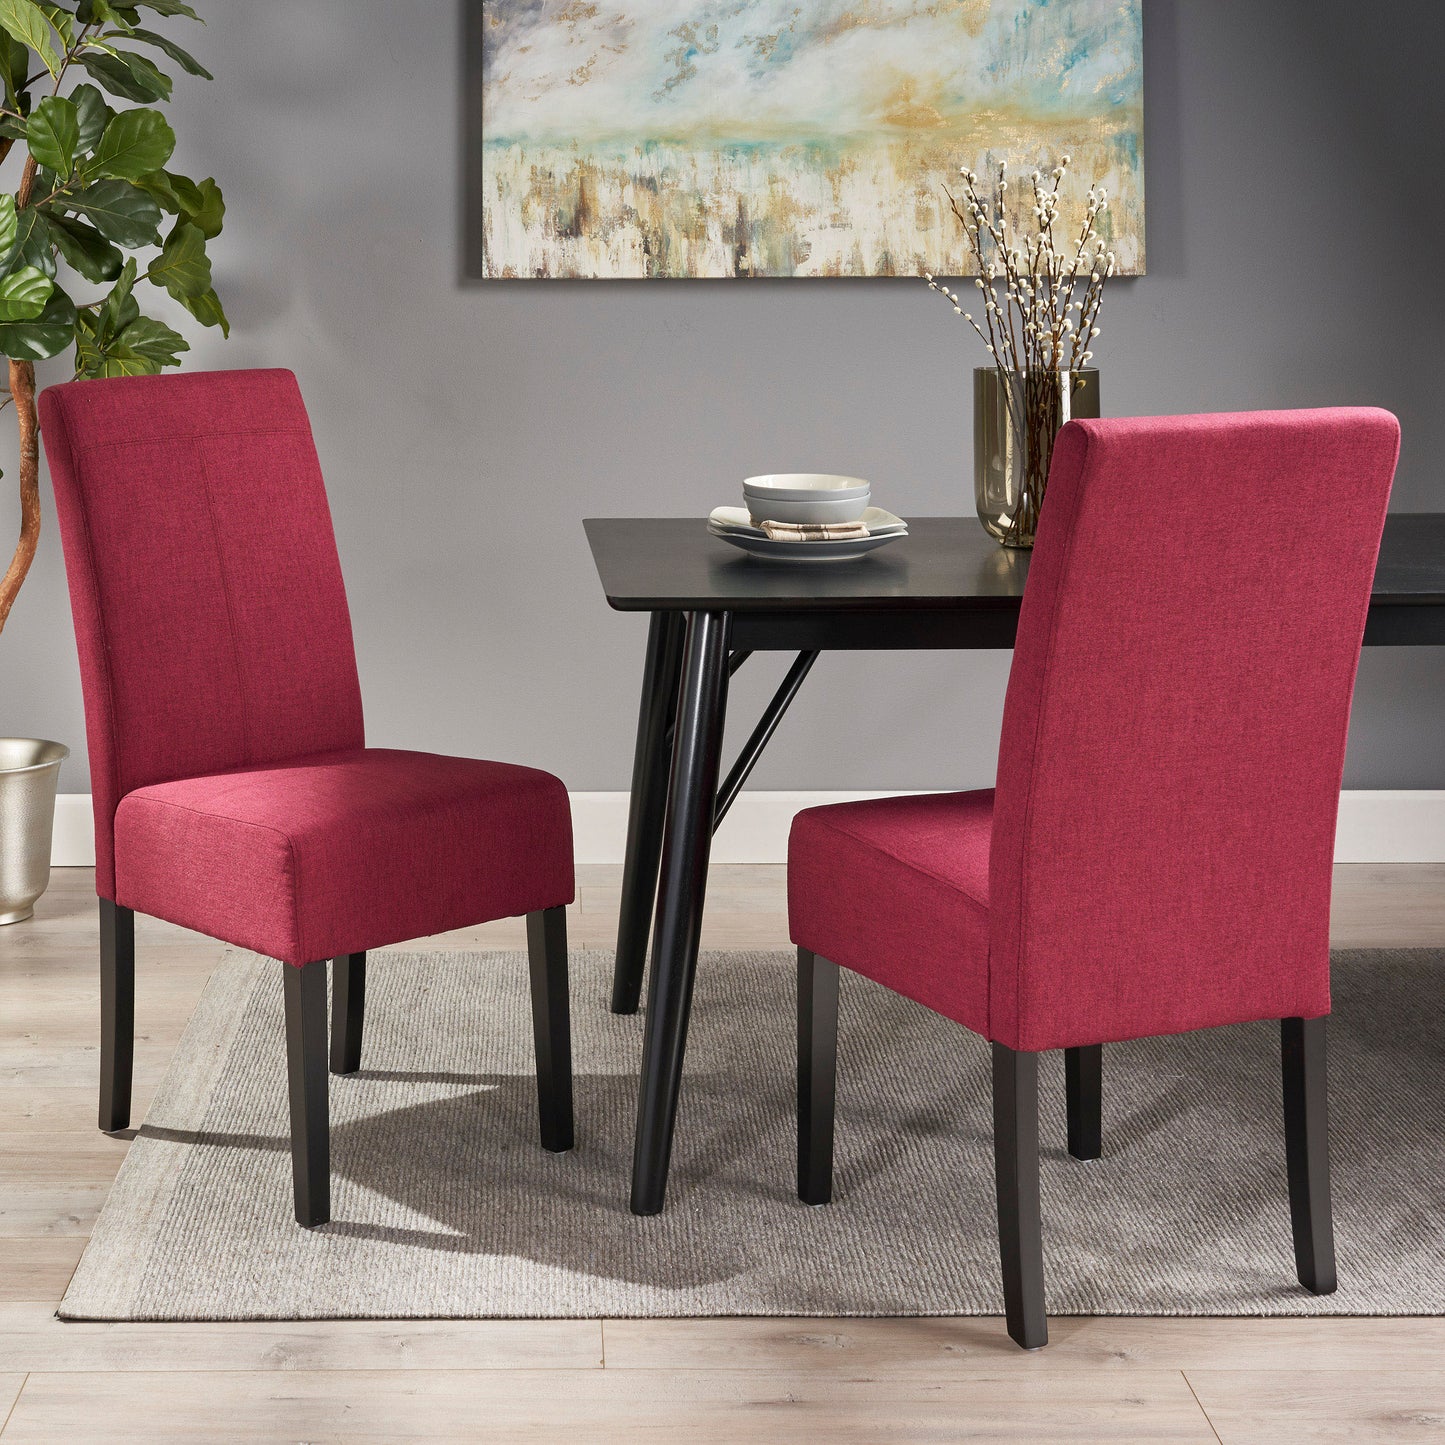 Raphael Wooden Dining Chairs (Set of 2), Deep Red and Dark Brown Finish